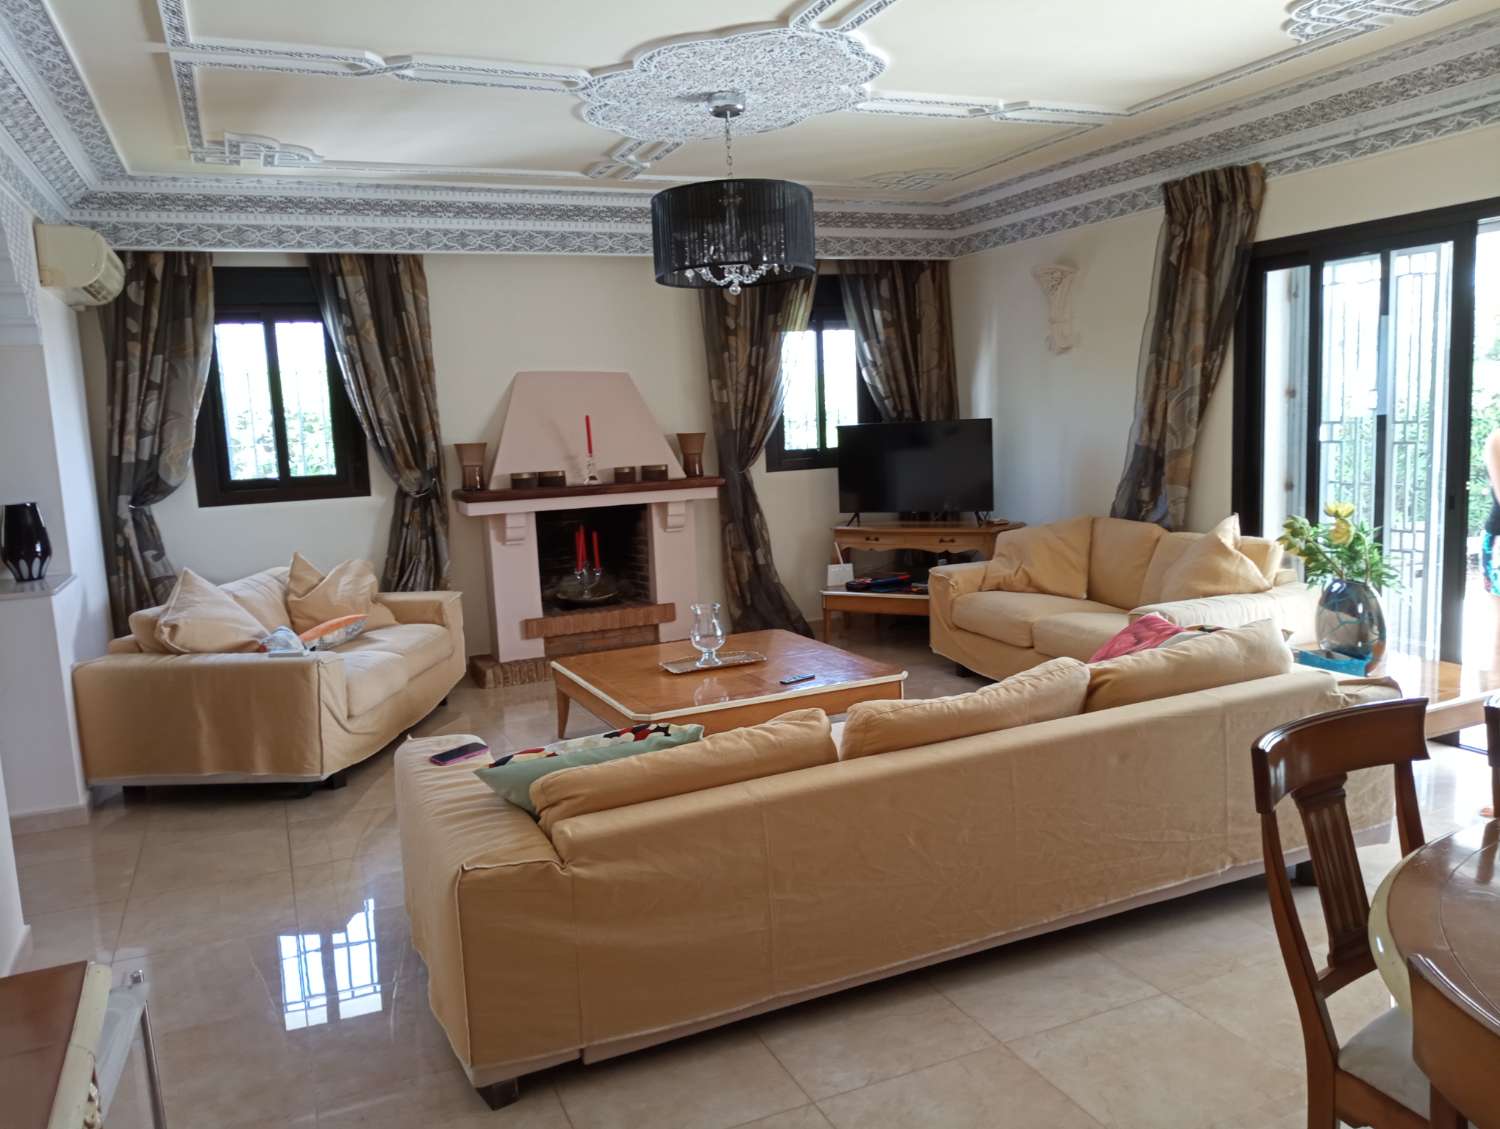 Beautiful villa on one floor. It consists of 3 bedrooms, two of them with a large bathroom en suite, a large living-dining room, an independent kitchen,